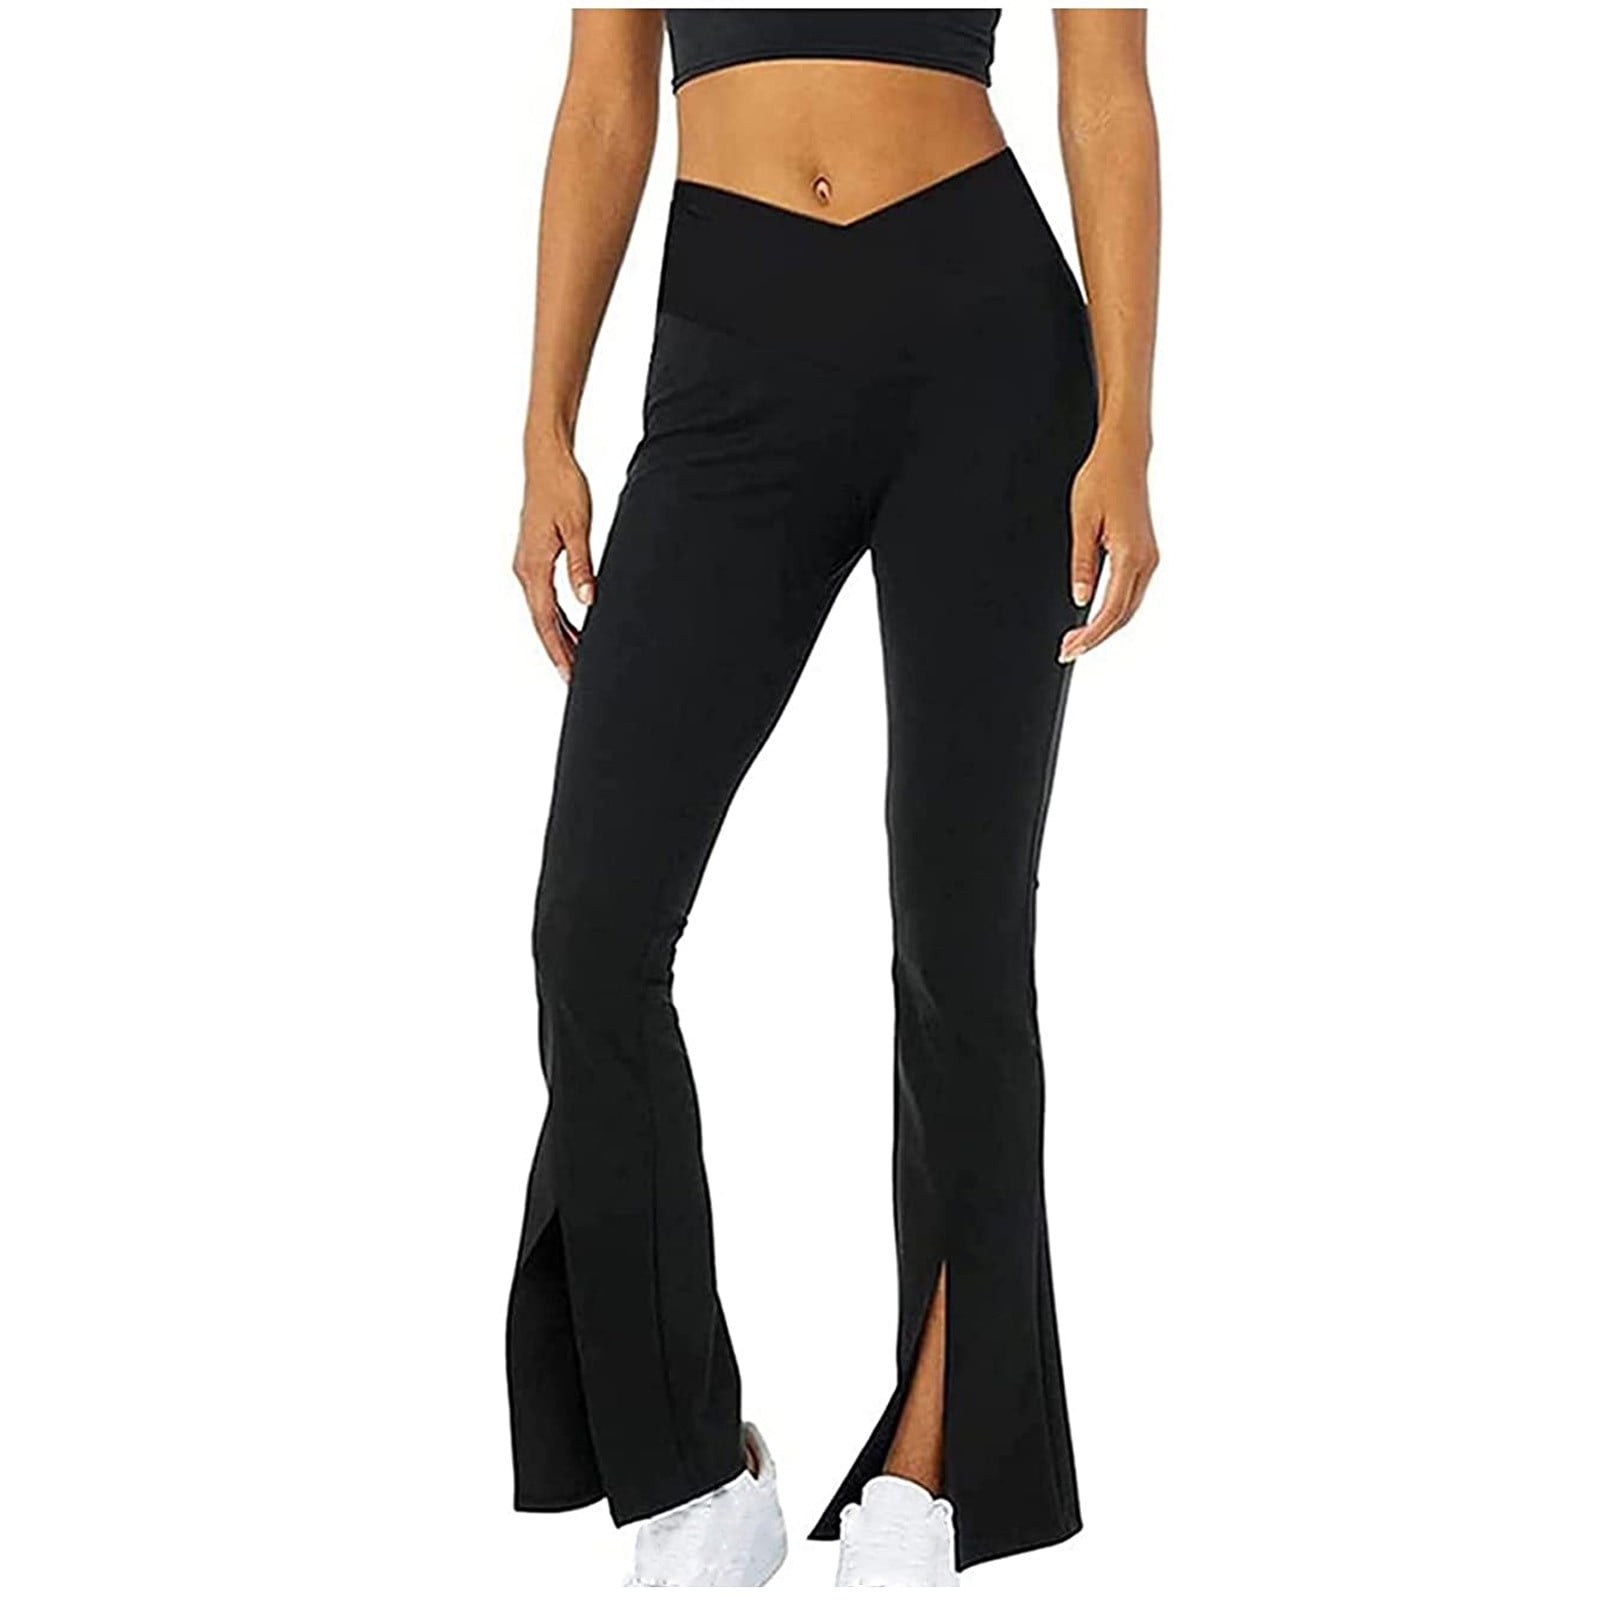 Chiccall Bootcut Yoga Pants - Flare Leggings for Women High